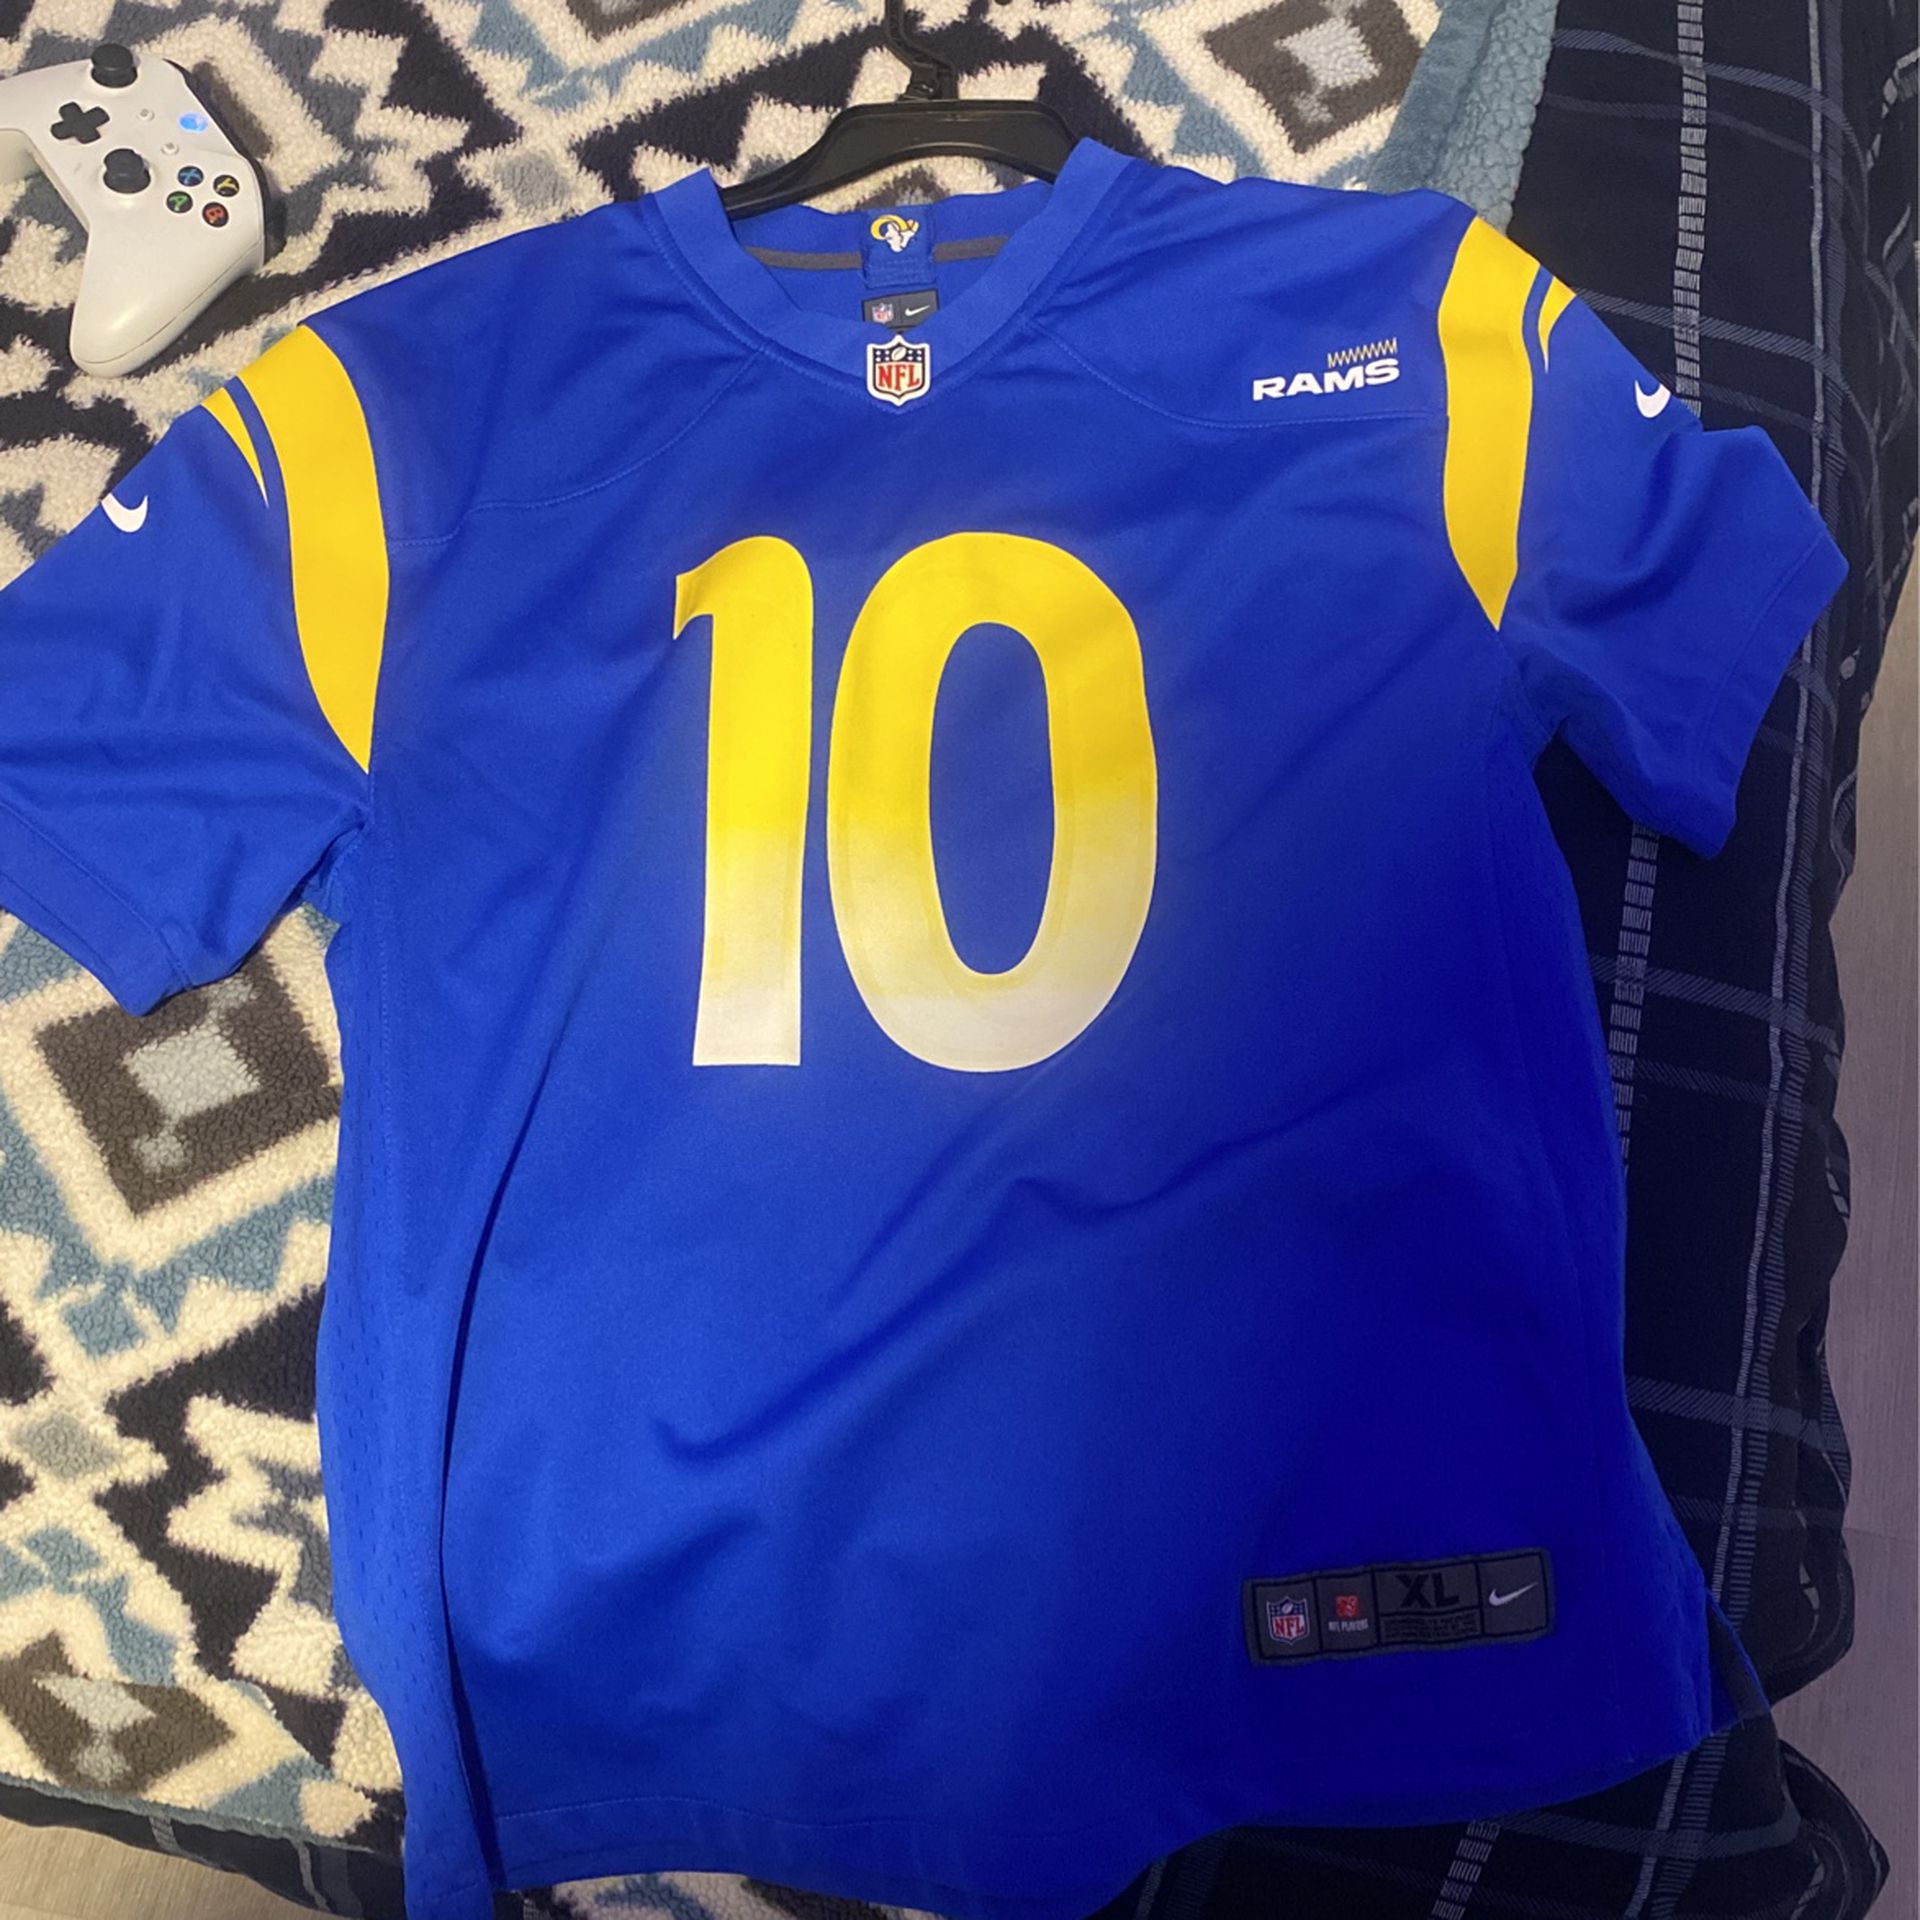 Cooper Kupp Jersey Youth xl